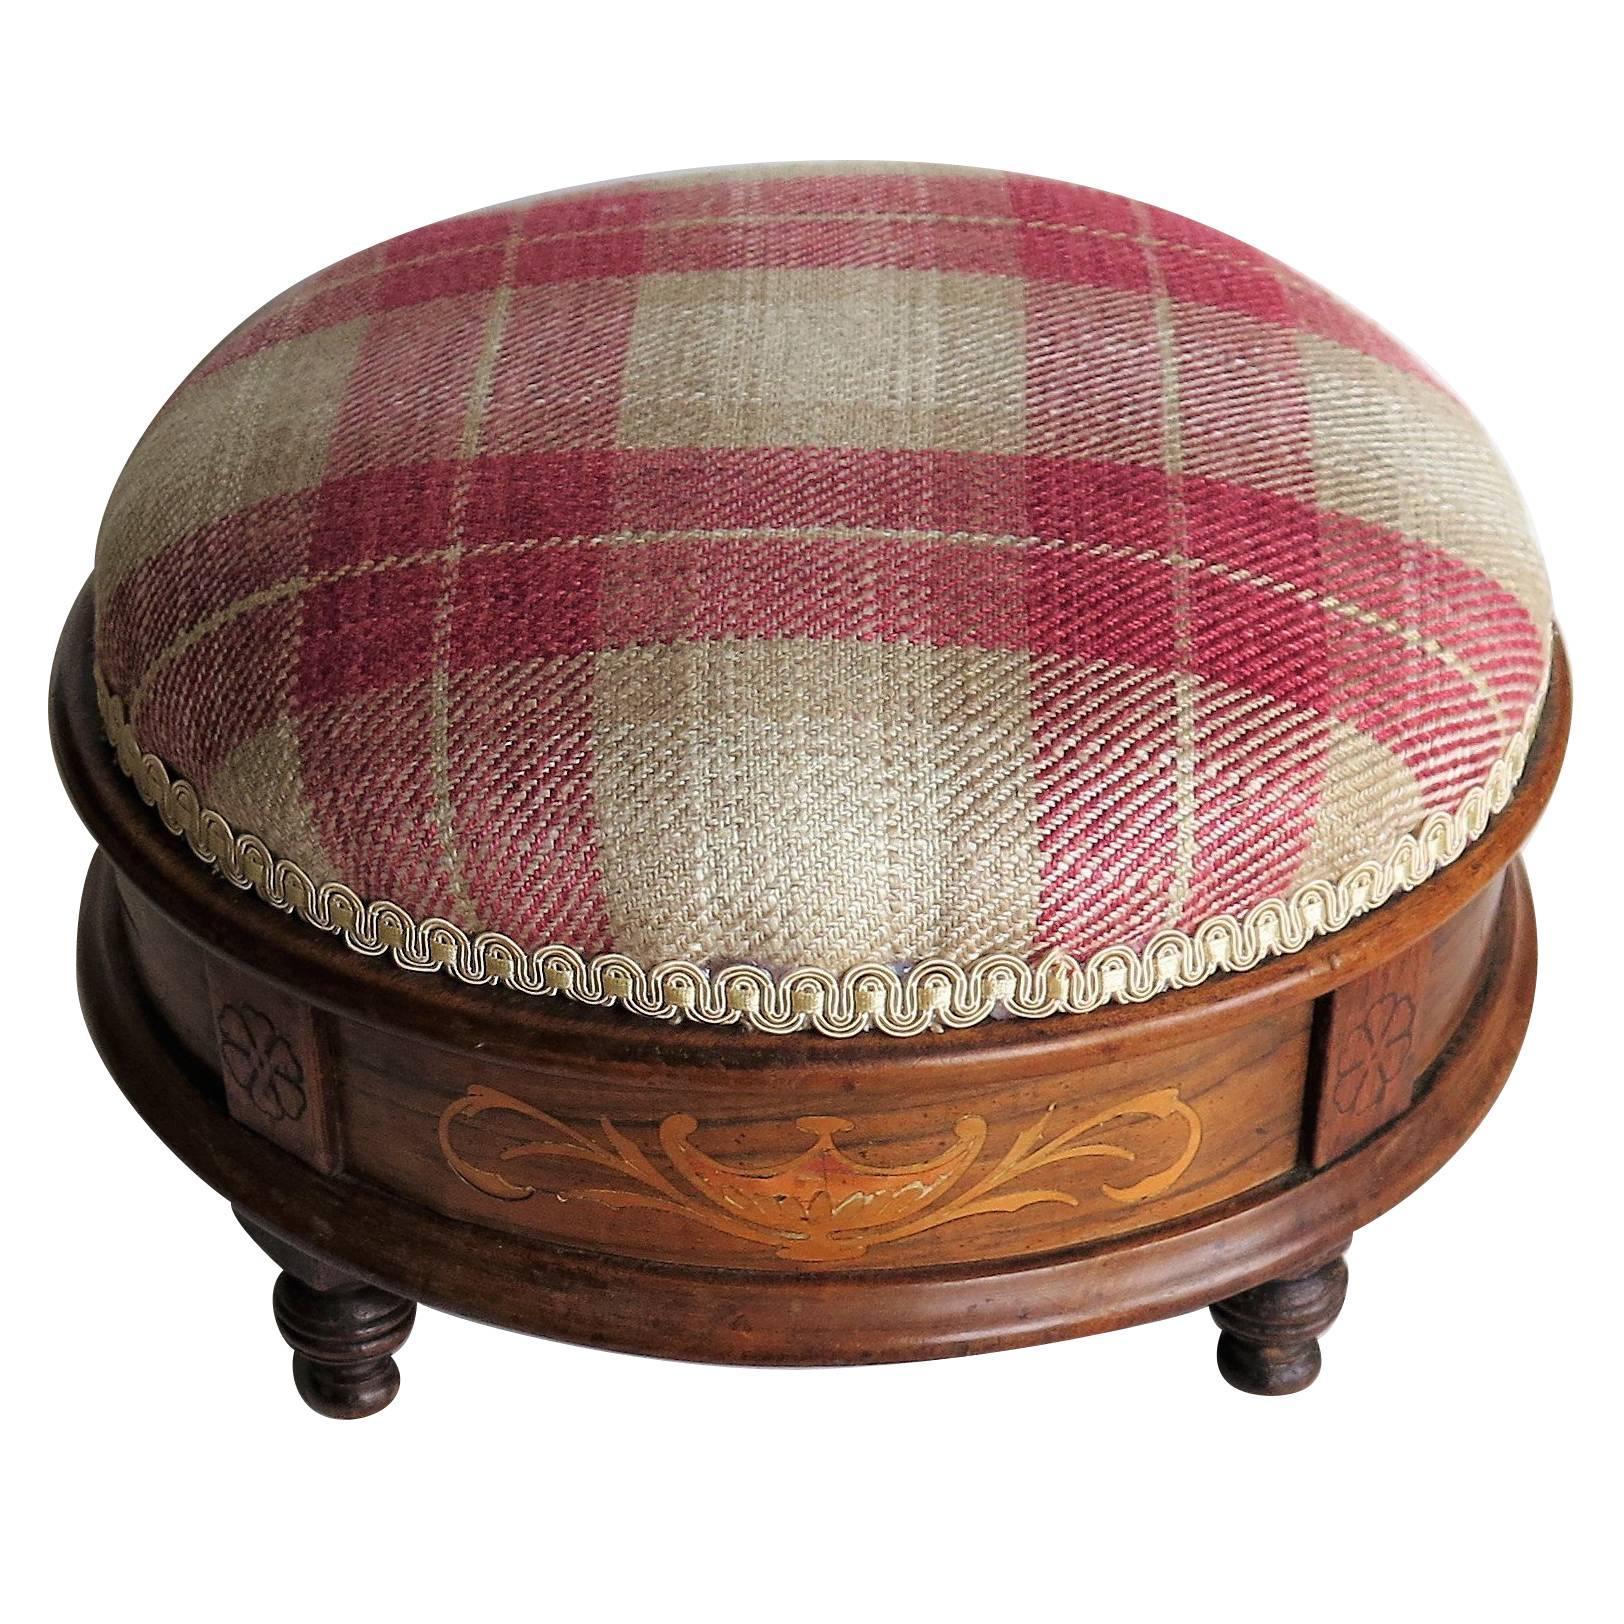 Early Victorian Foot stool Walnut Marquetry Inlay Re-upholstered, Ca. 1845